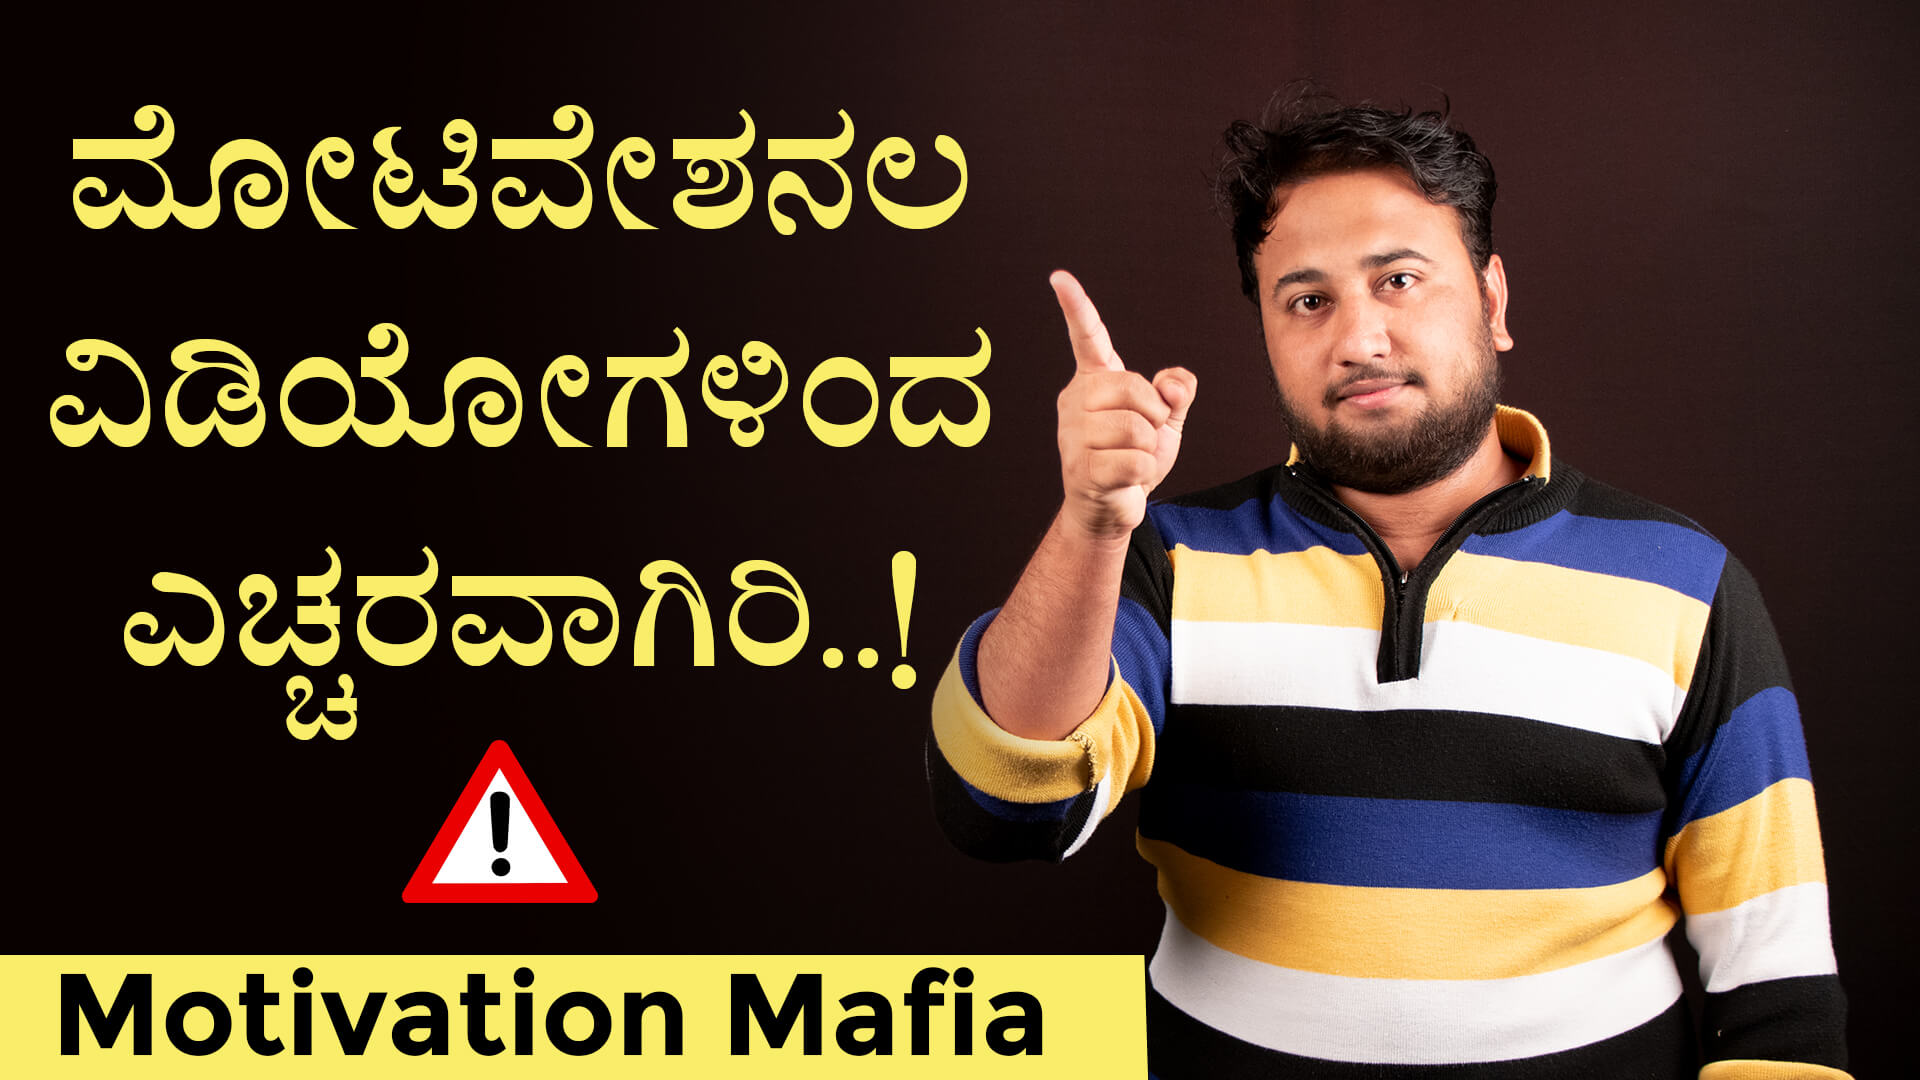 You are currently viewing ಮೋಟಿವೇಷನ ಹಾವಳಿ : Motivation is diverting you – Kannada Life Changing and Motivational Article